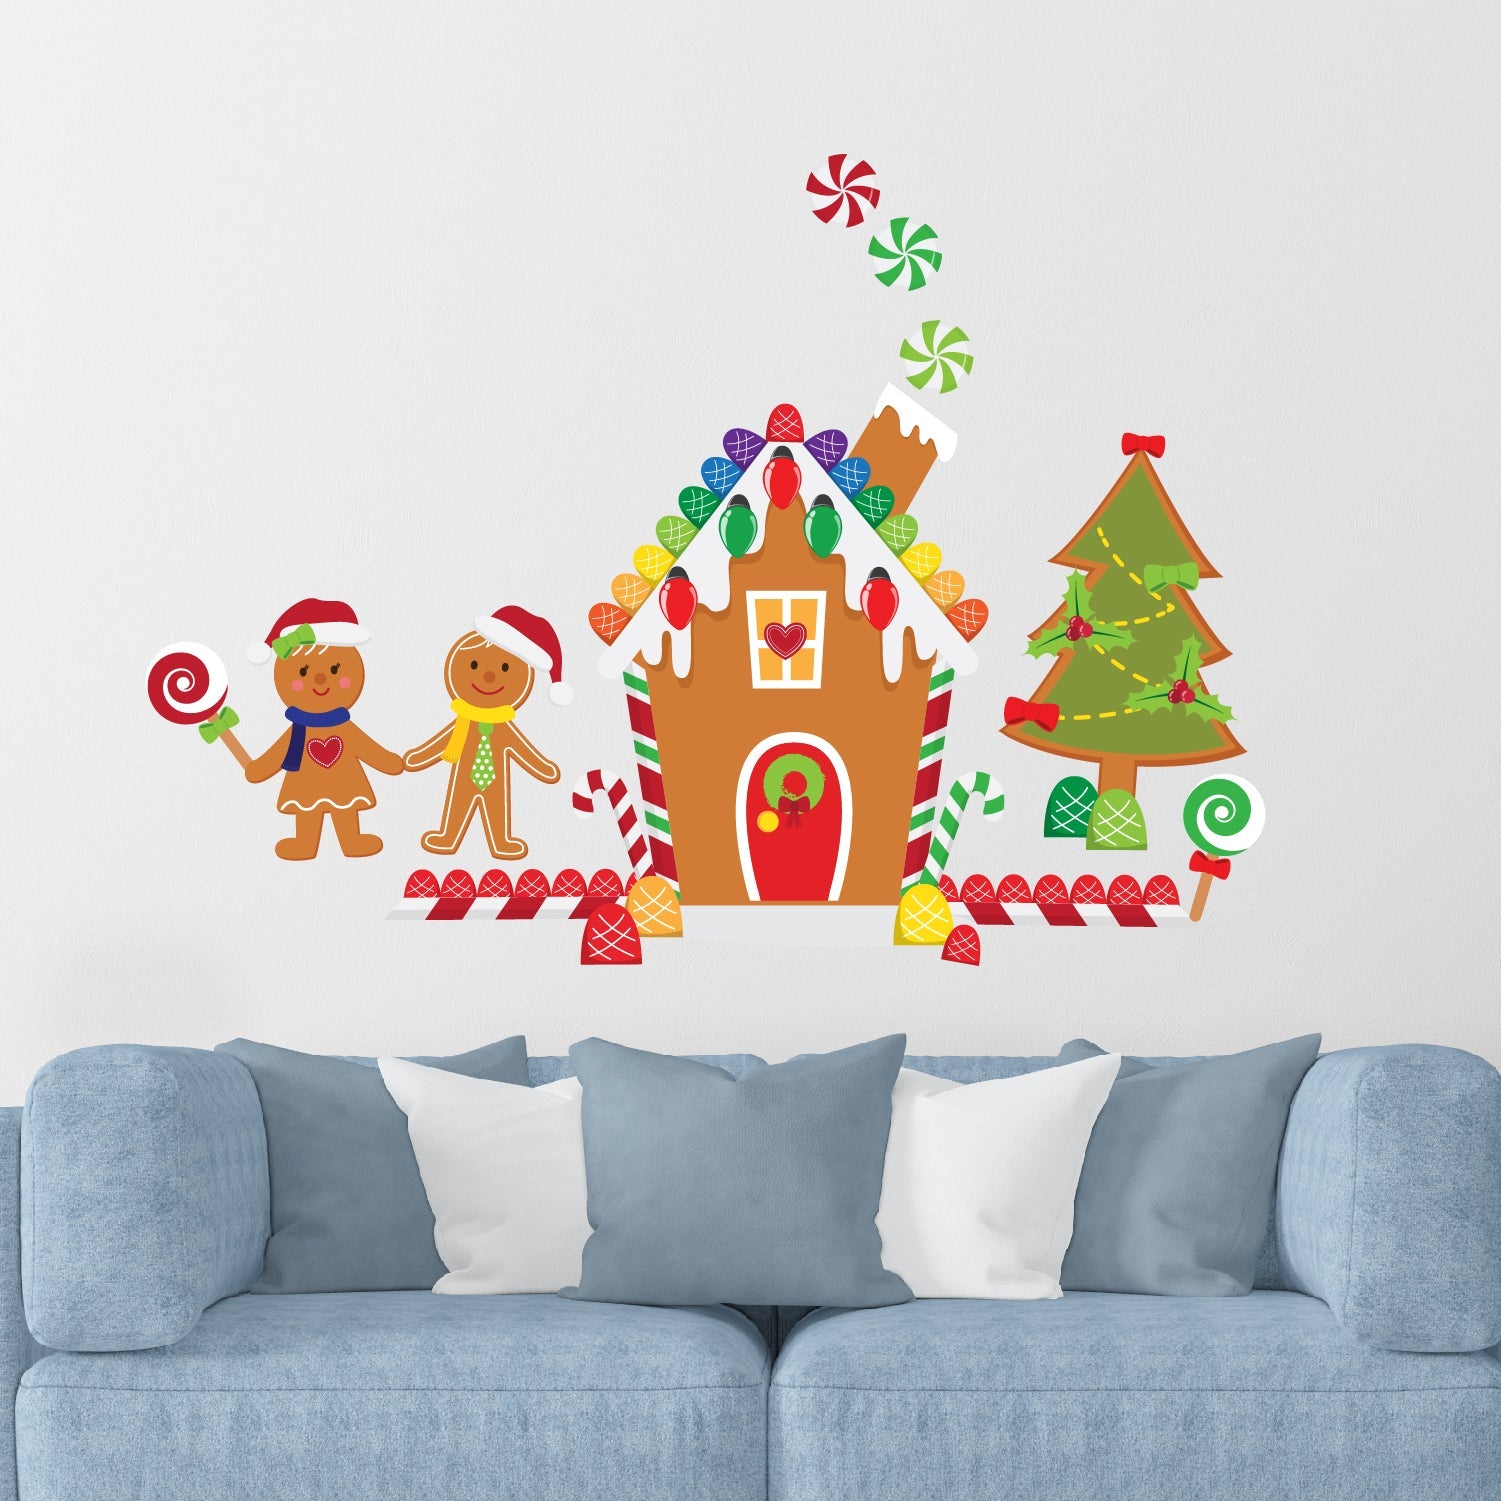 Christmas Gingerbread House Kit Wall Decals - NO MESS! - Picture Perfect Decals